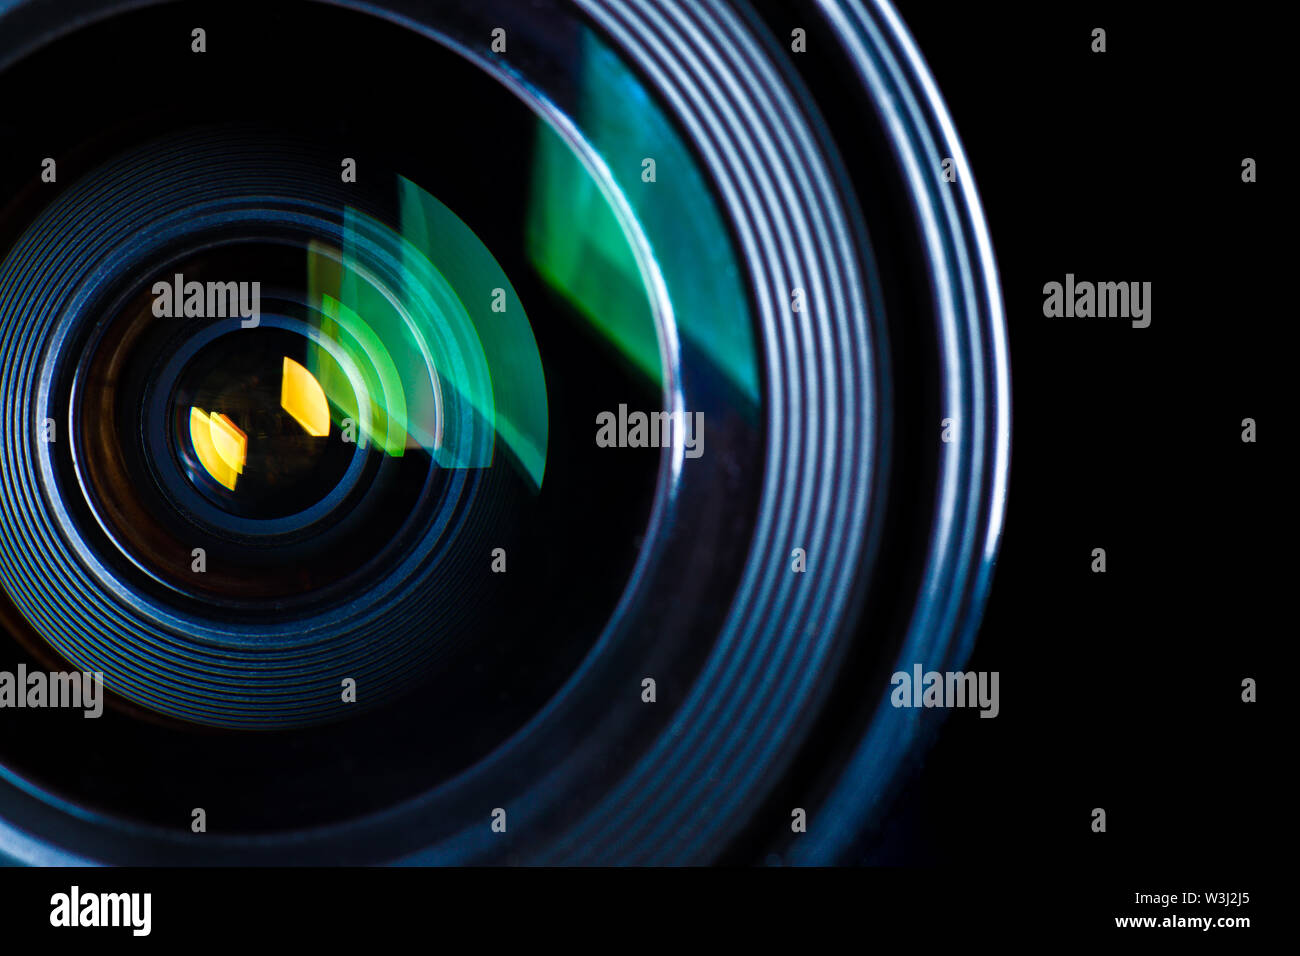 Close Up of a Photographic Lens on Black Background Stock Photo